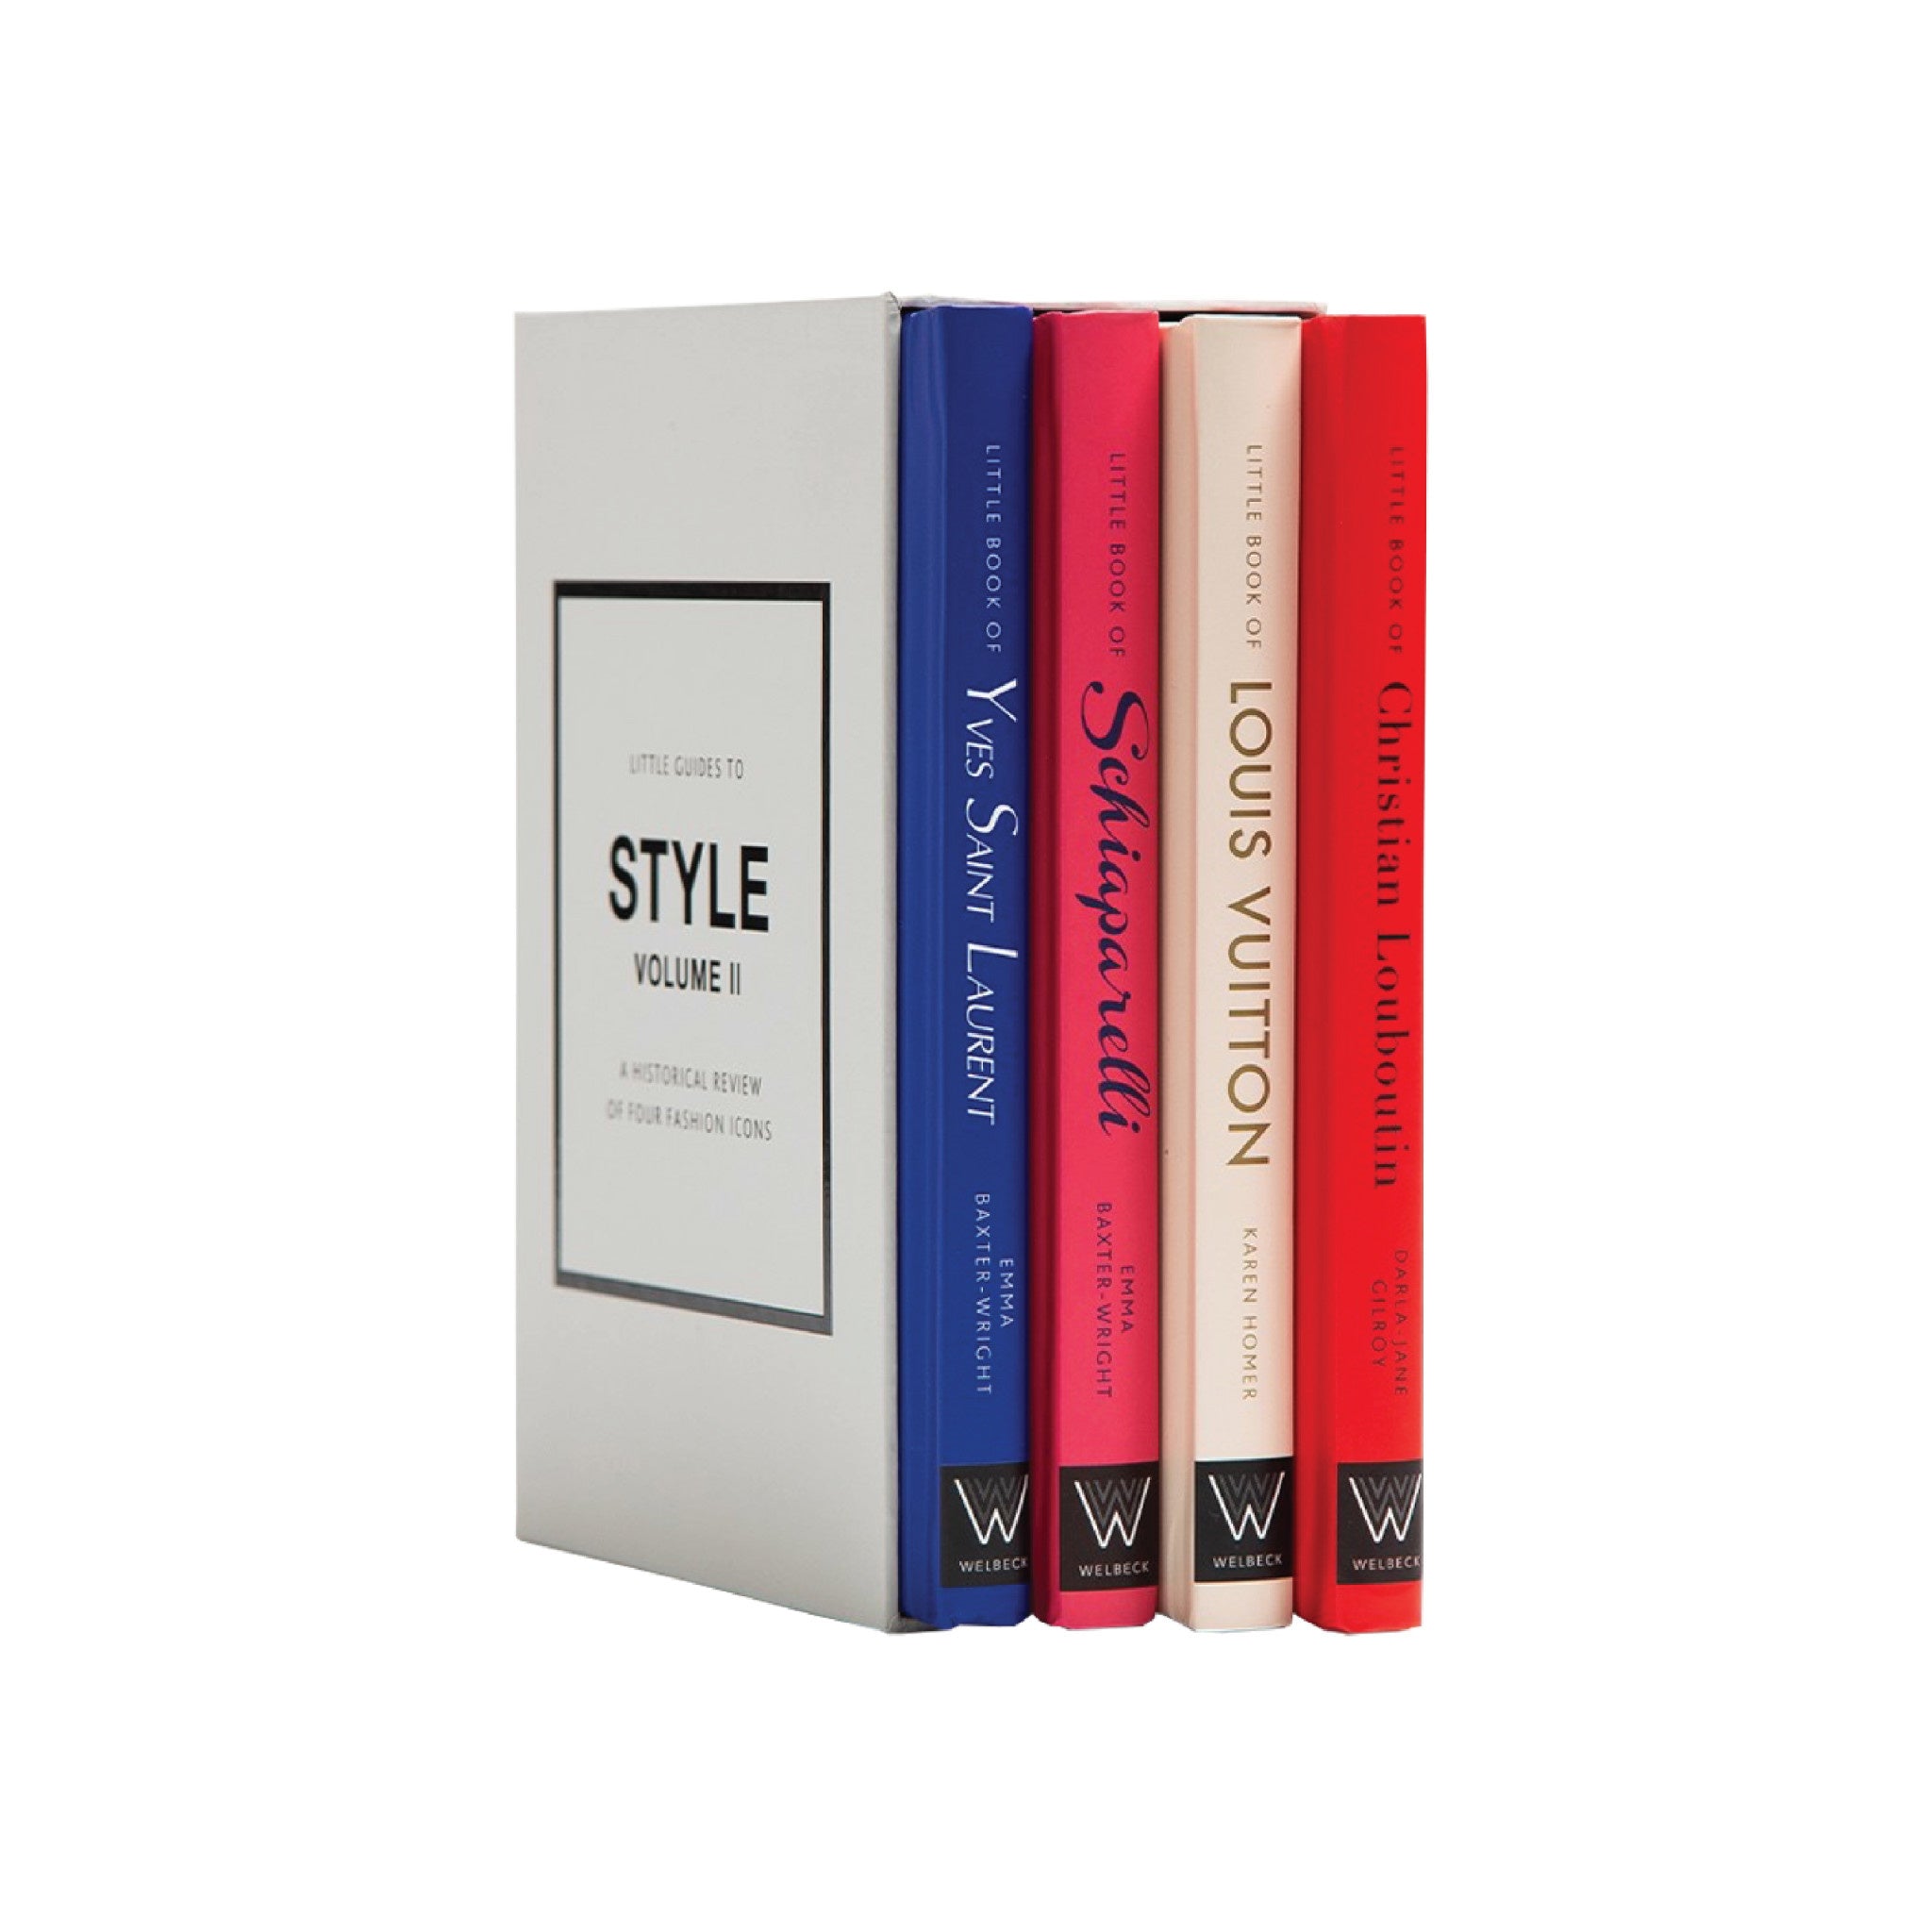 Book Little Guides to Style Volume II: A Historical View of Four Fashion  Icons - Grey Books, Stationery & Pens, Decor & Accessories - BOOOK32547